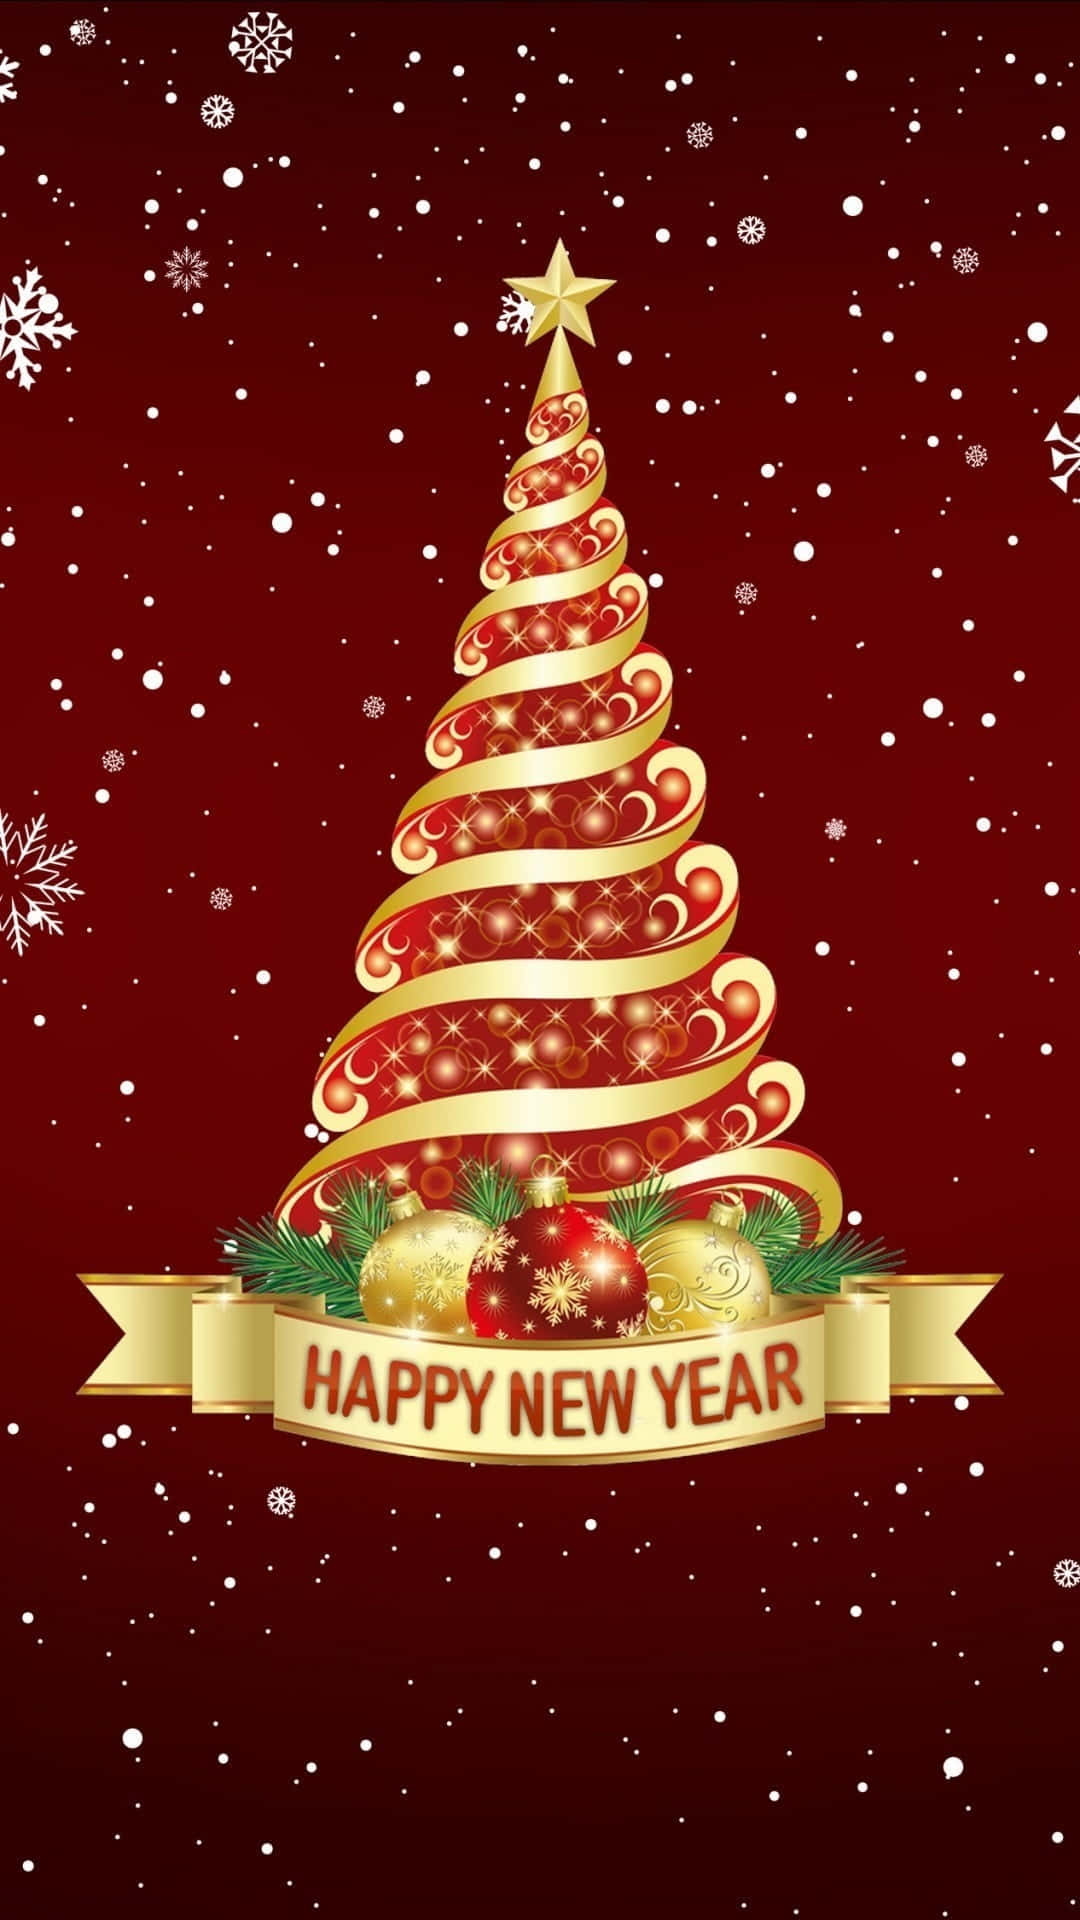 Wishing You A Prosperous New Year From A Mobile Phone Wallpaper